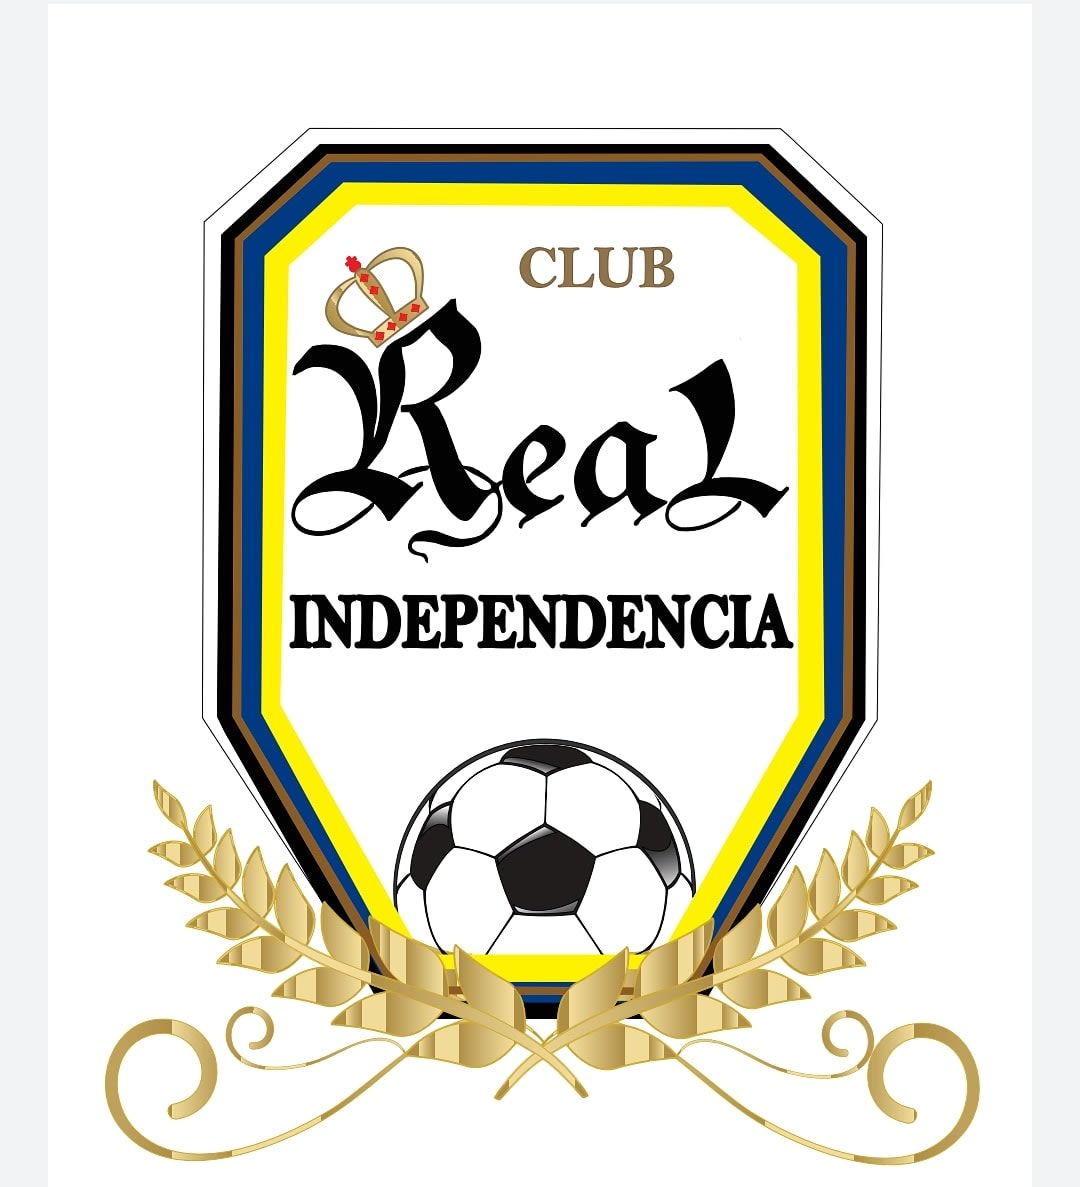 Club Real Independendencia